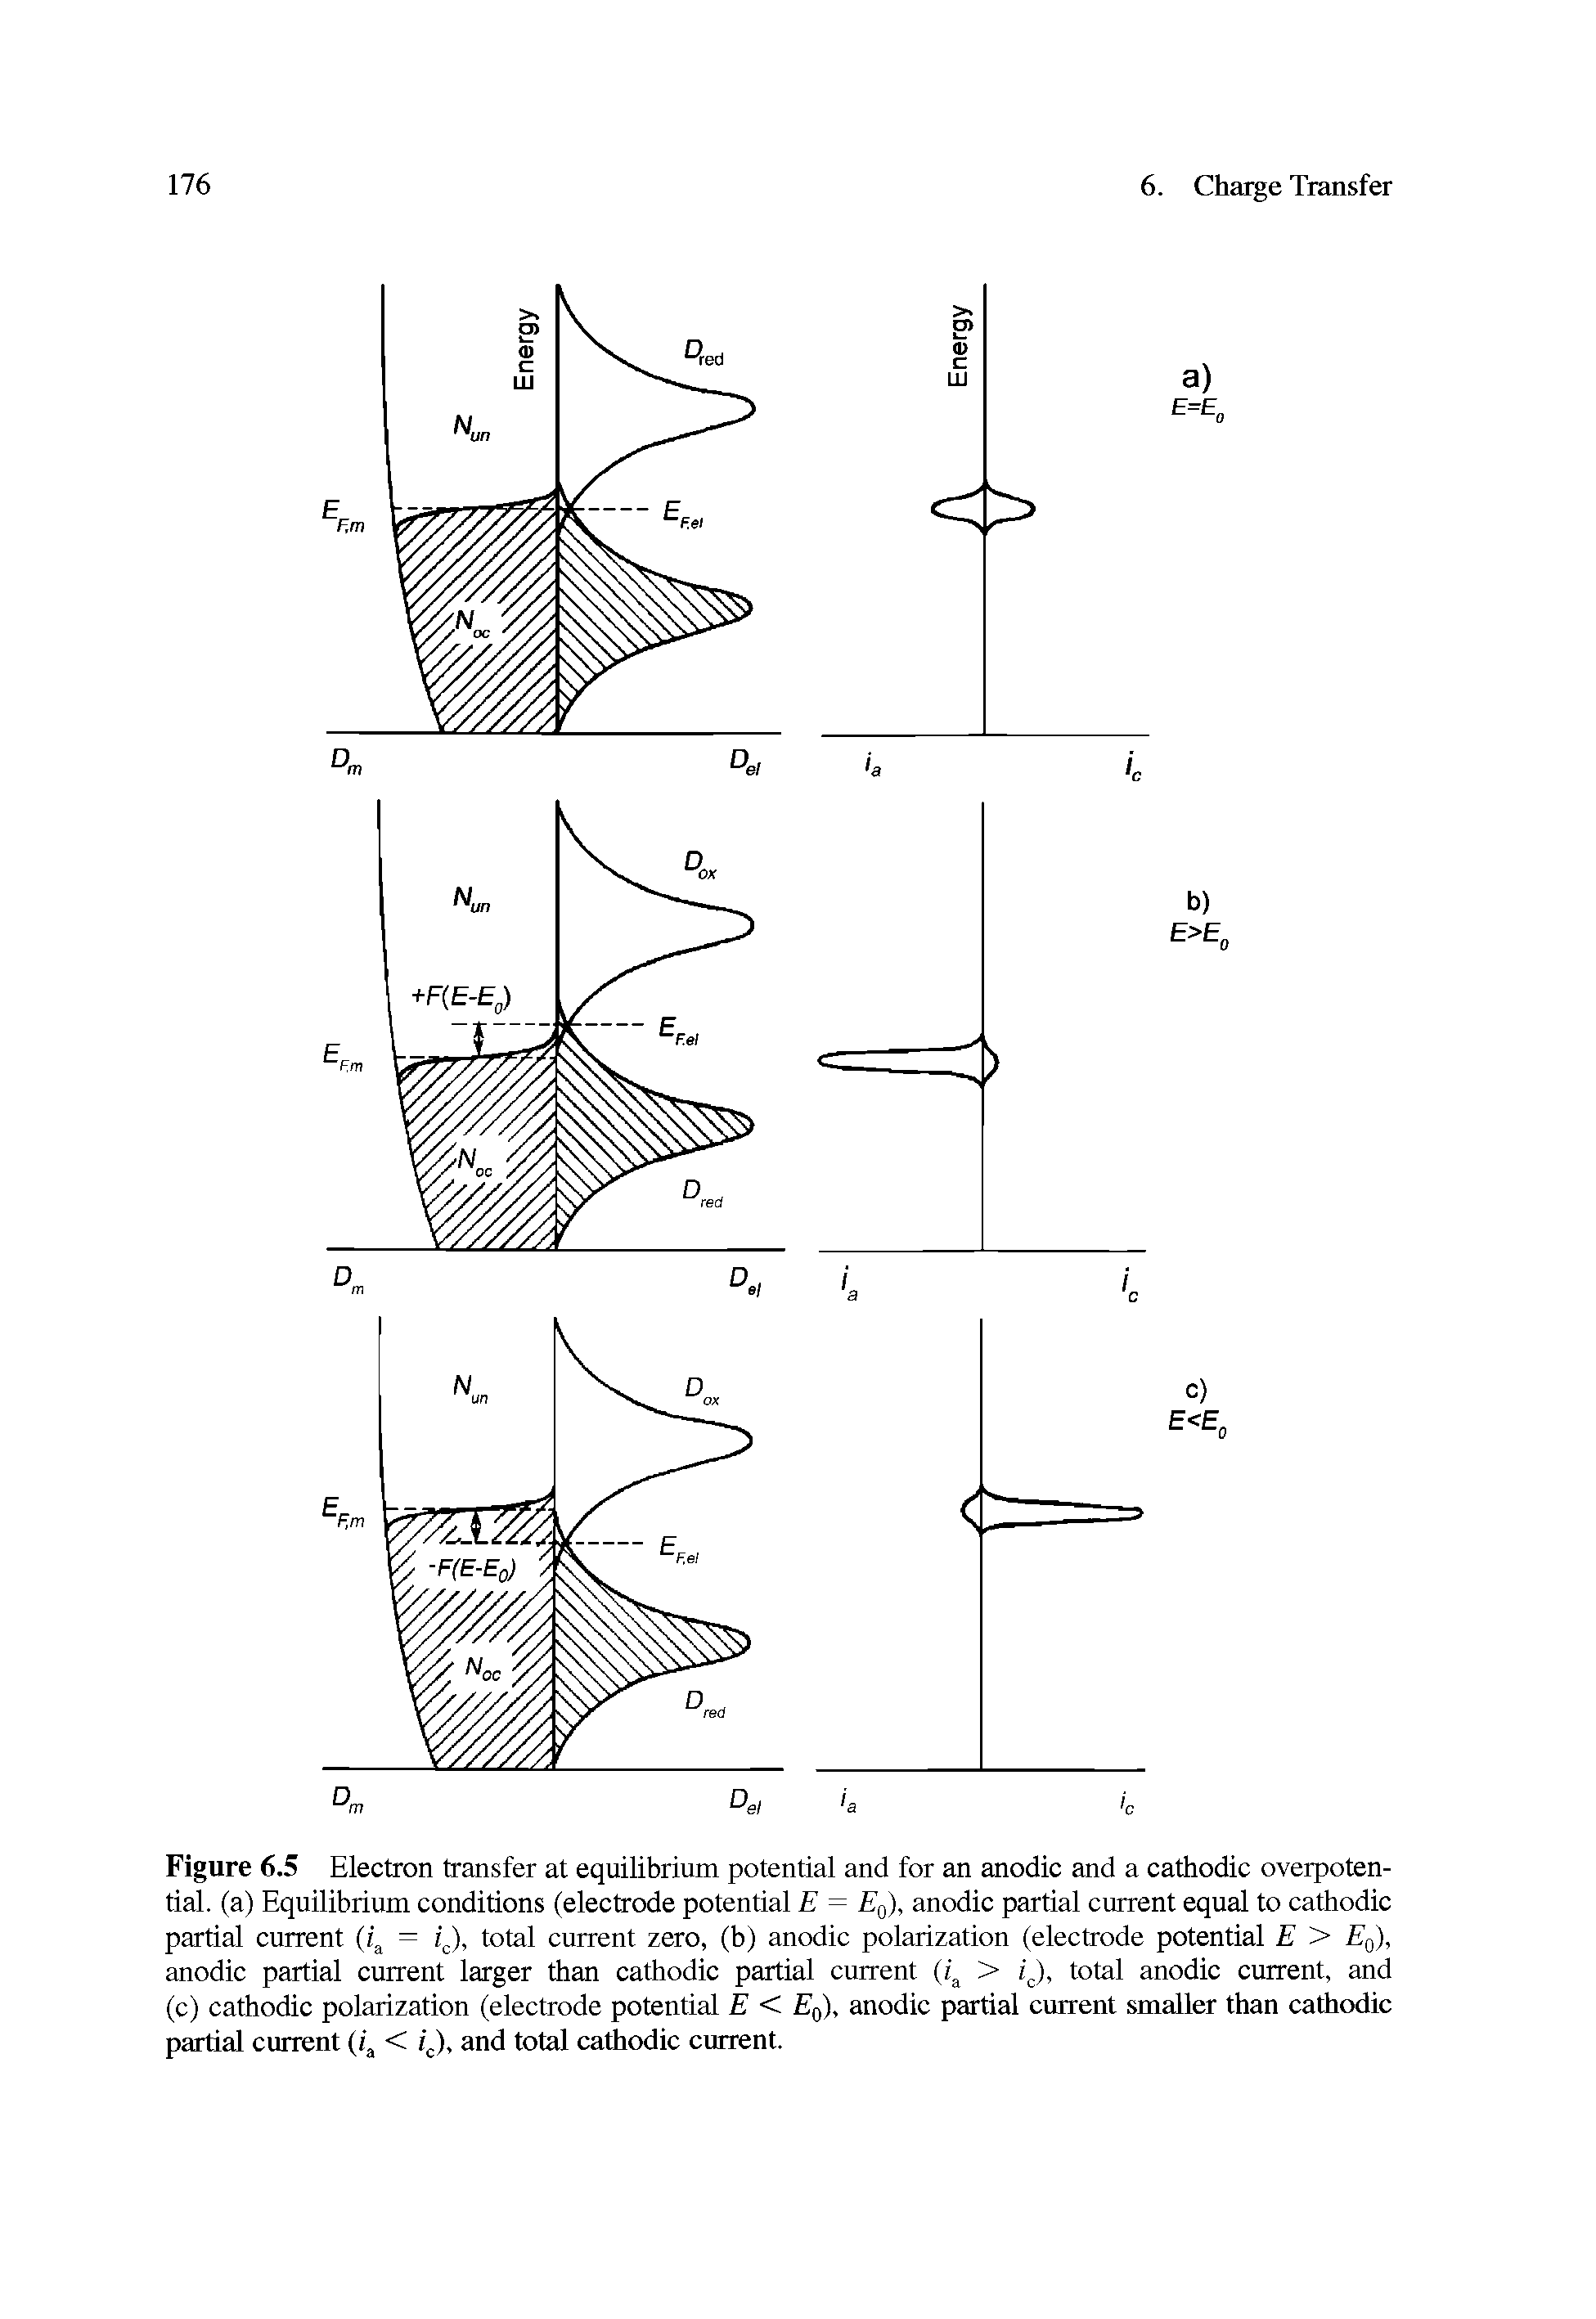 Figure 6.5 Electron transfer at equilibrium potential and for an anodic and a cathodic overpotential. (a) Equilibrium conditions (electrode potential E = Eg), anodic partial current equal to cathodic partial current (4 = 4)> current zero, (b) anodic polarization (electrode potential E > Eg),...